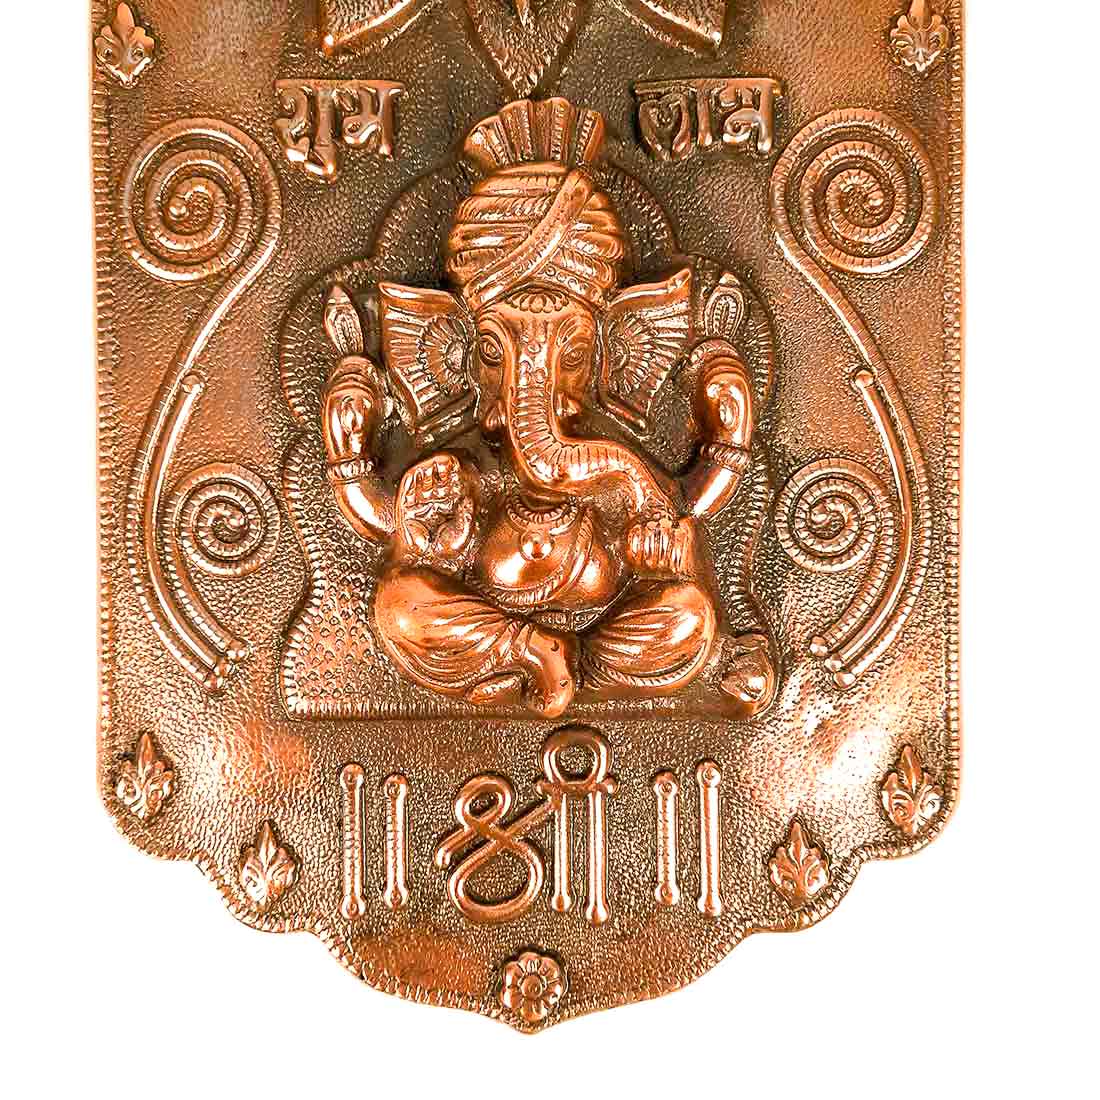 Ganesh Wall Hanging Murti | Ganesha With Om And Shubh Labh Wall Idol Decor - for Entrance Door | Ganesha Statue Hangings - for Home, Puja, Temple, Religious Decor & Gift - 14 Inch